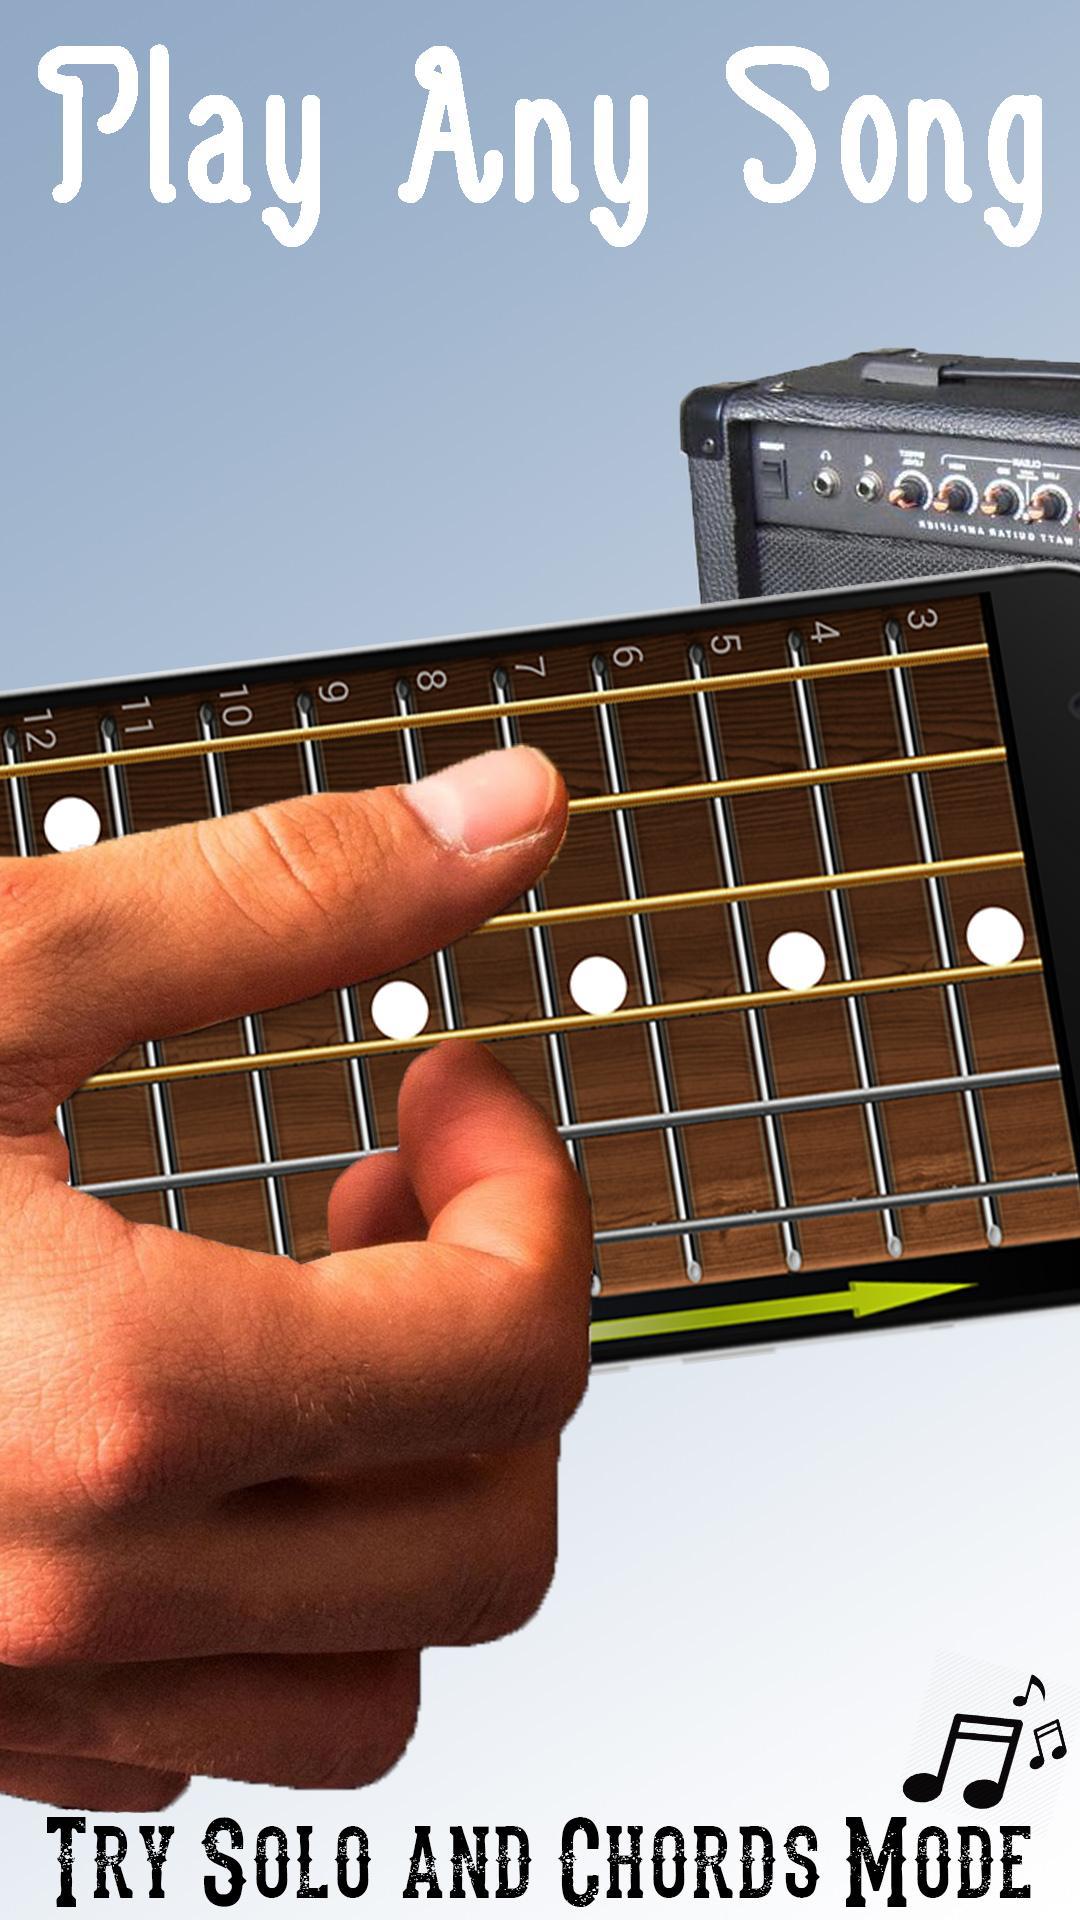 Real Guitar - Virtual Guitar Pro for Android - APK Download